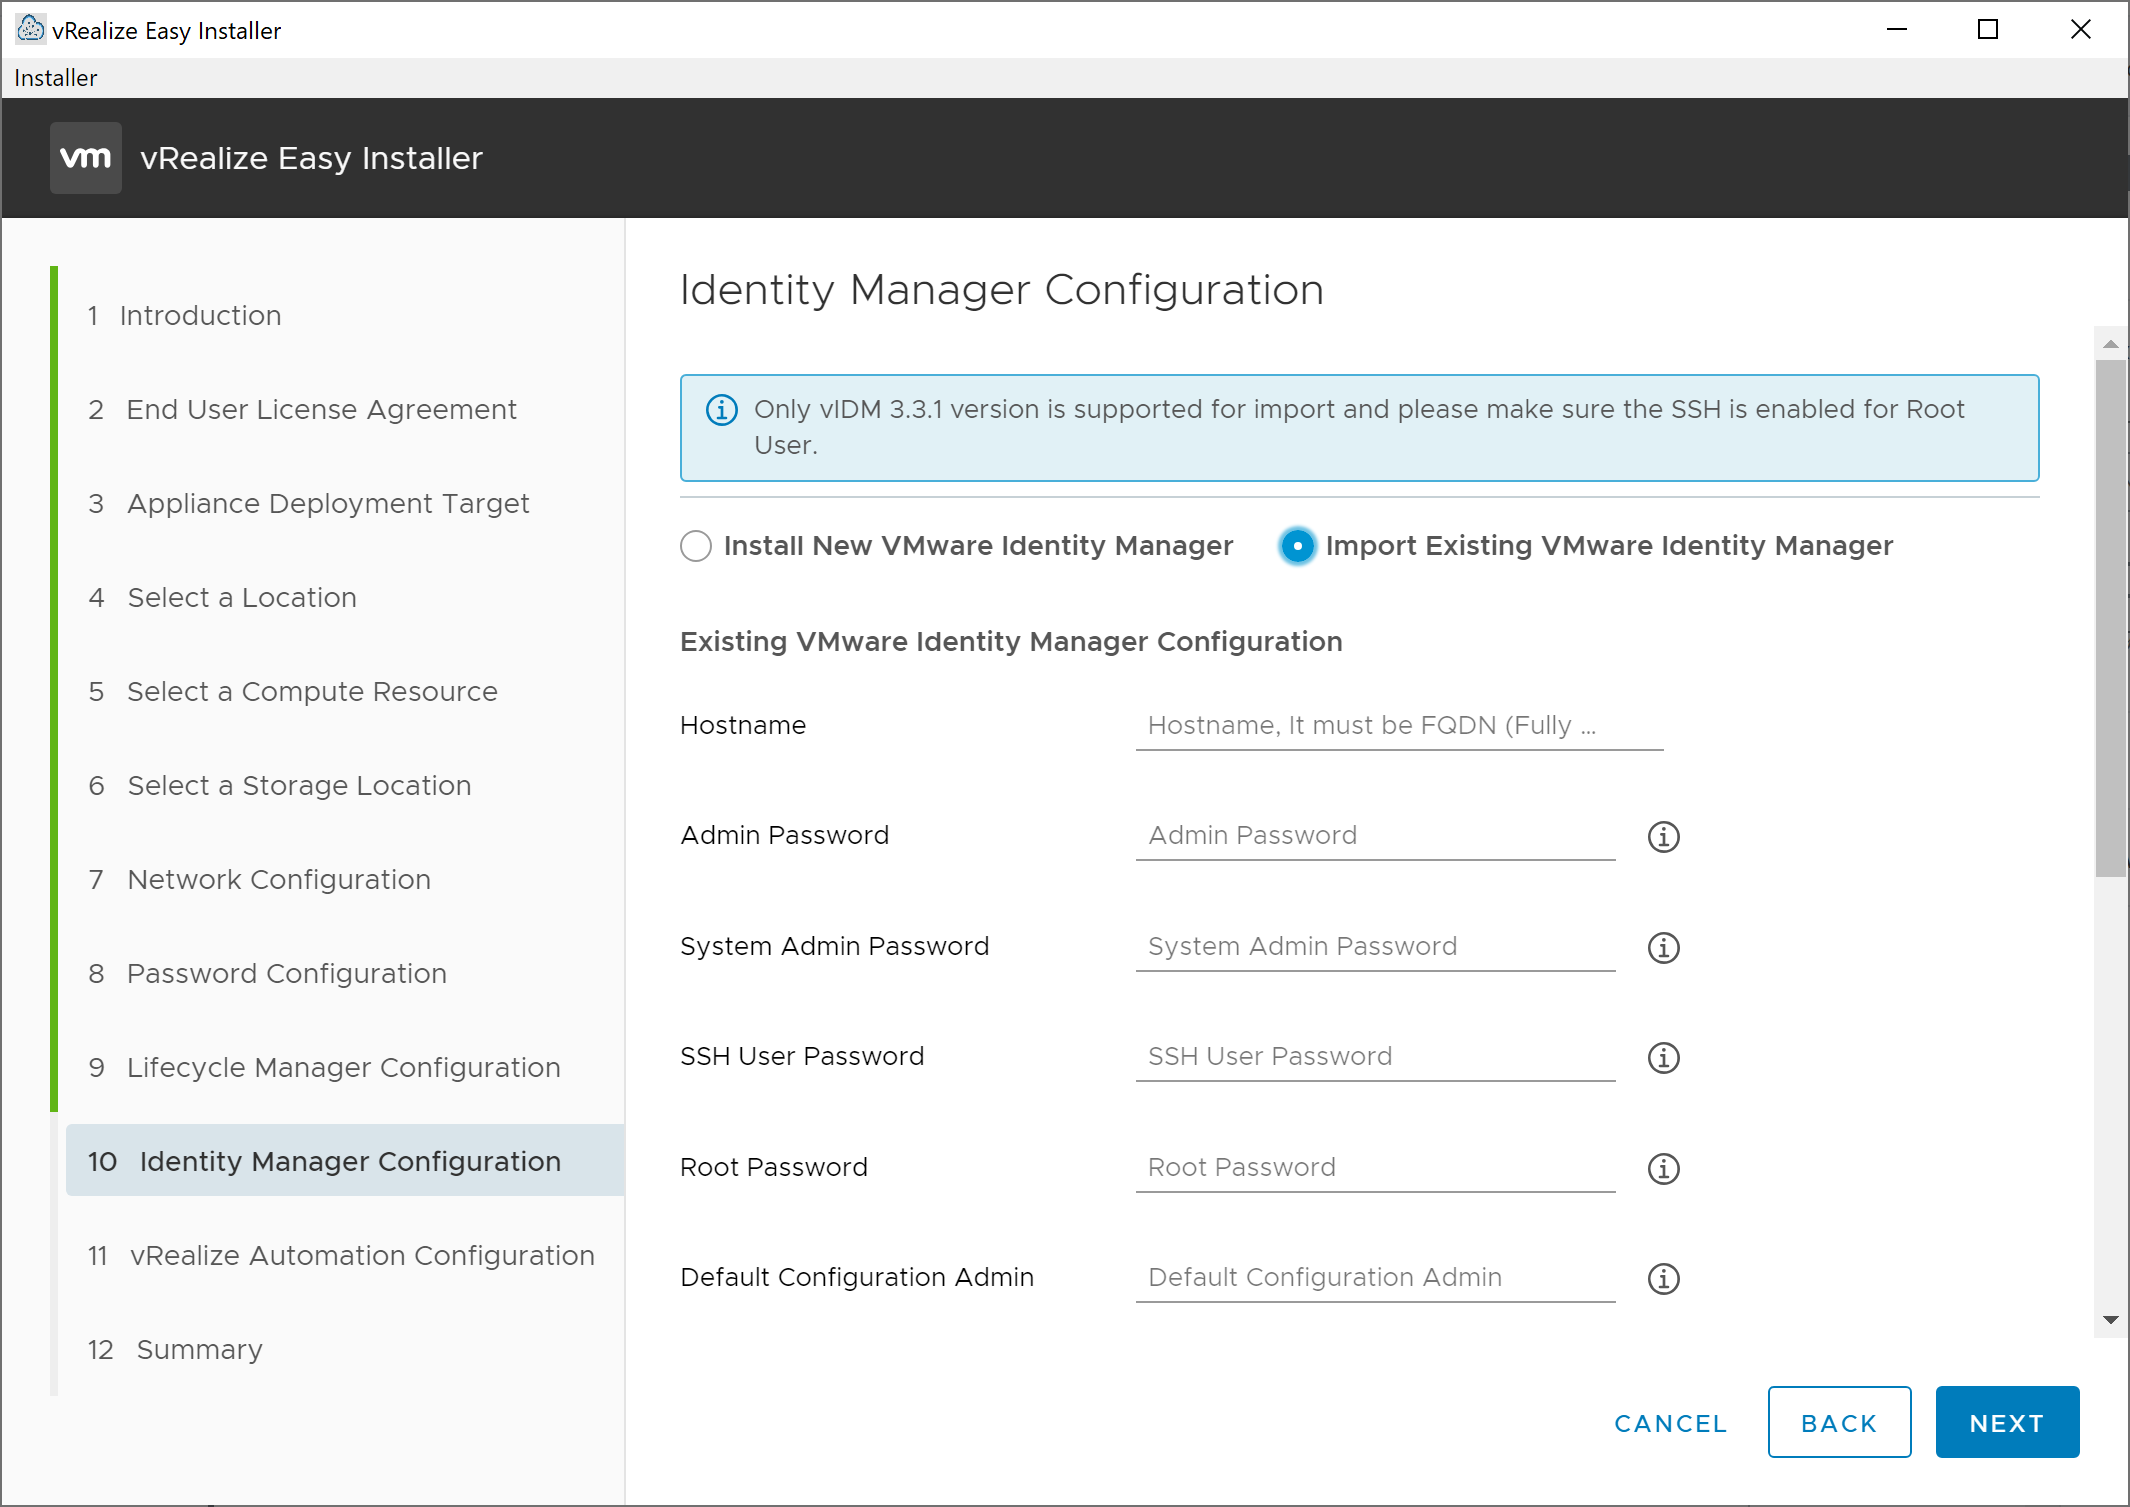 vRealize Easy Installer - New Install - Identity Manager Configuration - Import Existing Identity Manager